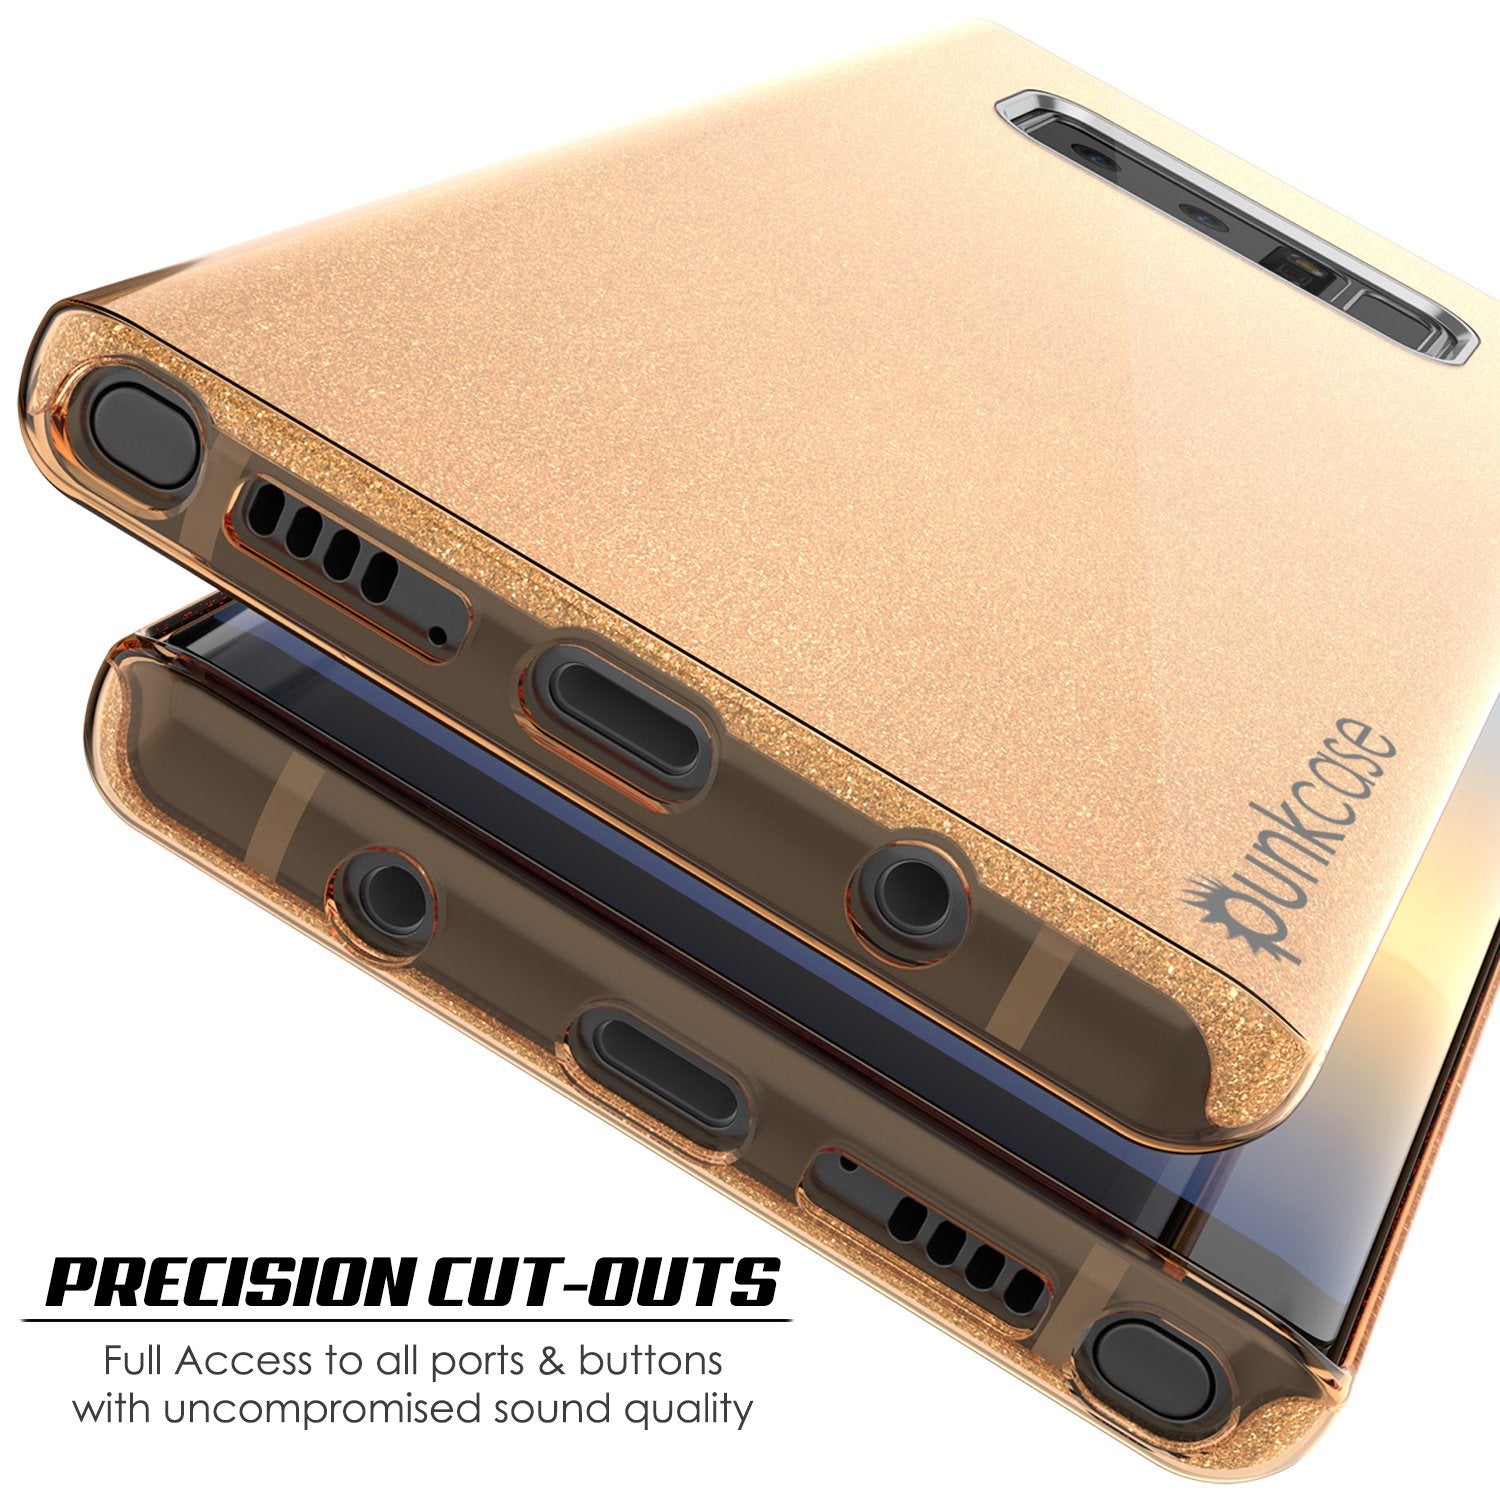 Galaxy Note 8 Case, Punkcase Galactic 2.0 Series Ultra Slim [Gold]